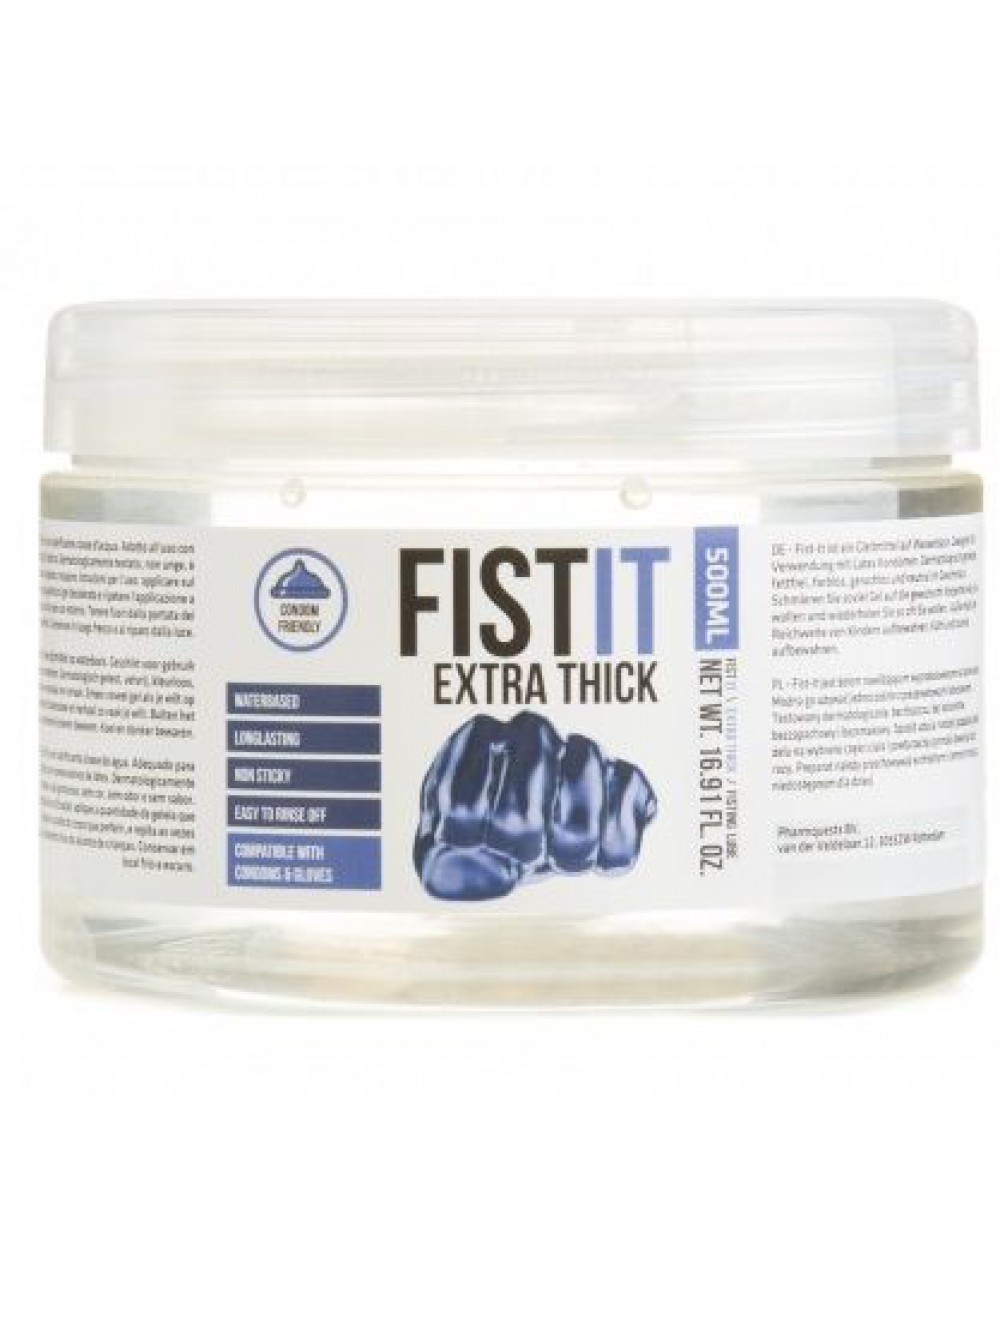 Lubrificante Pharmaquests Fist It - Extra Thick - 500ml